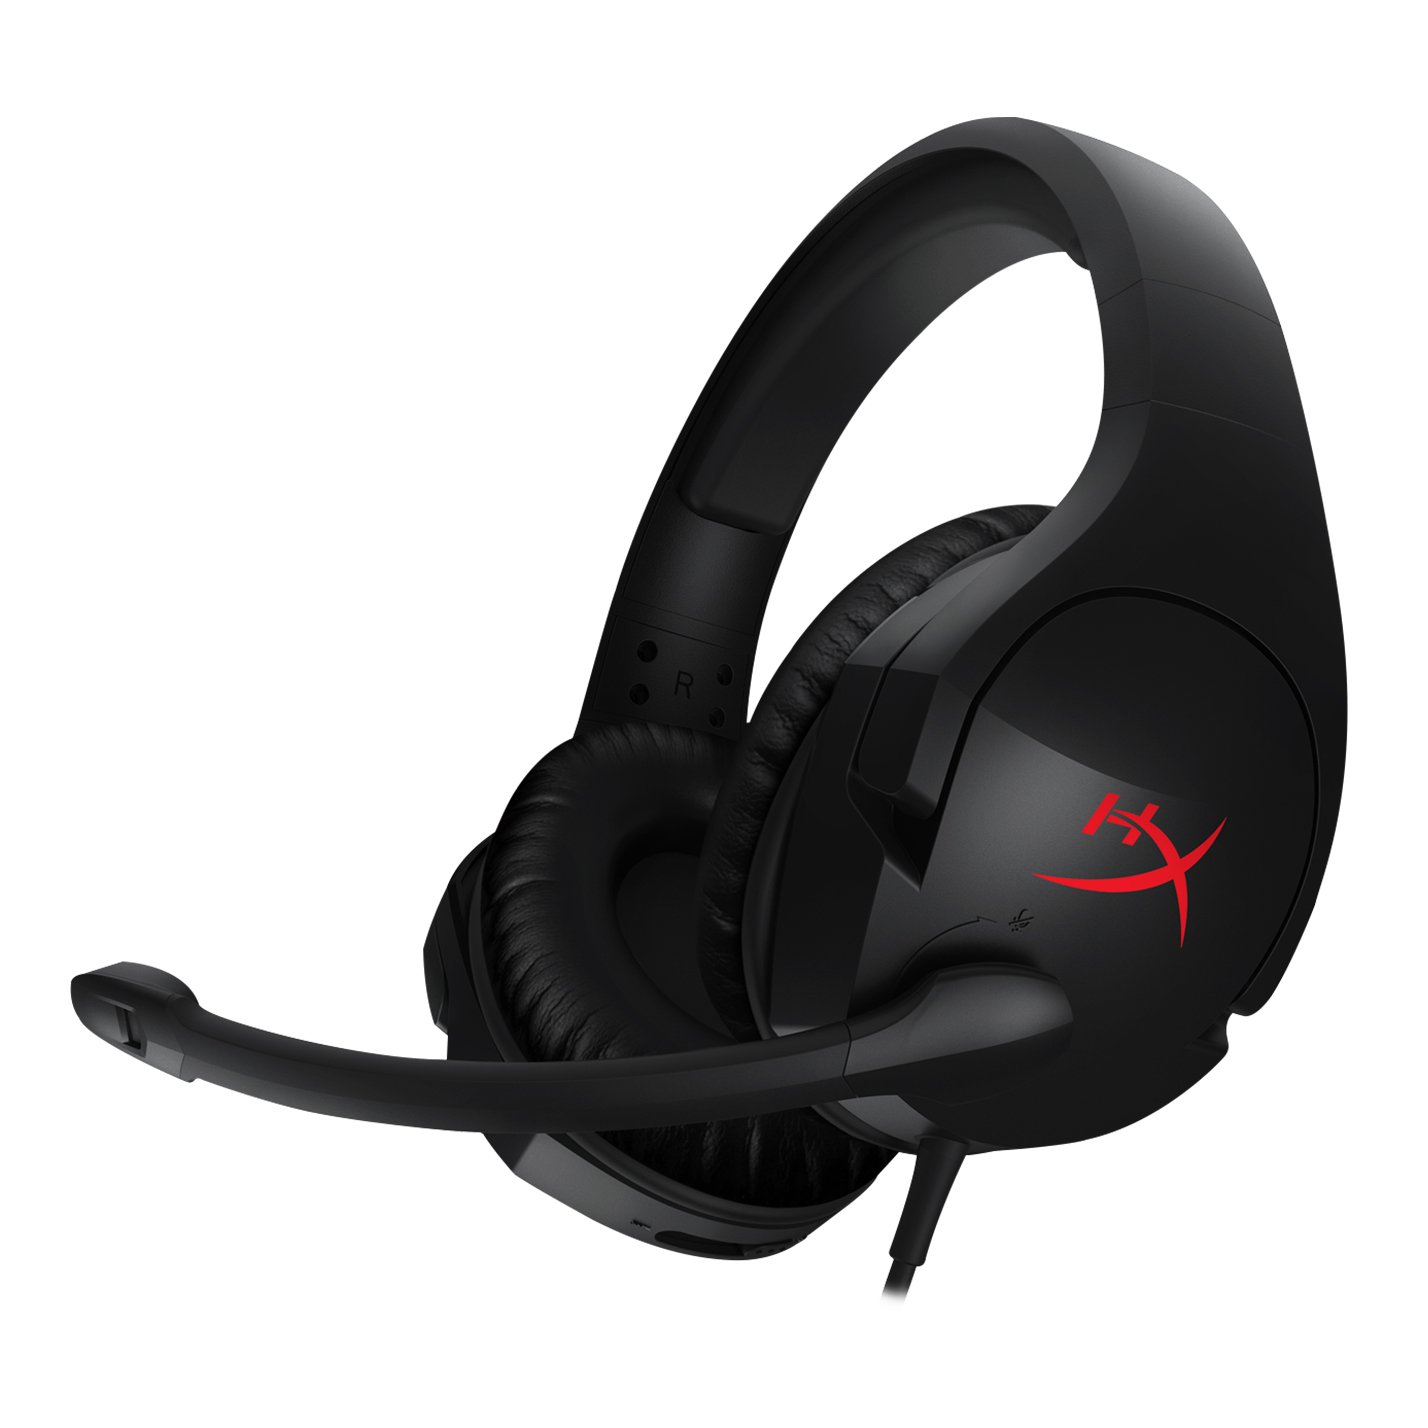 HyperX Cloud Stinger - Gaming Headset – Comfortable HyperX Signature Memory Foam, Swivel to Mute Noise-Cancellation Microphone, Compatible with PC, Xbox One, PS4, Nintendo Switch, and Mobile Devices